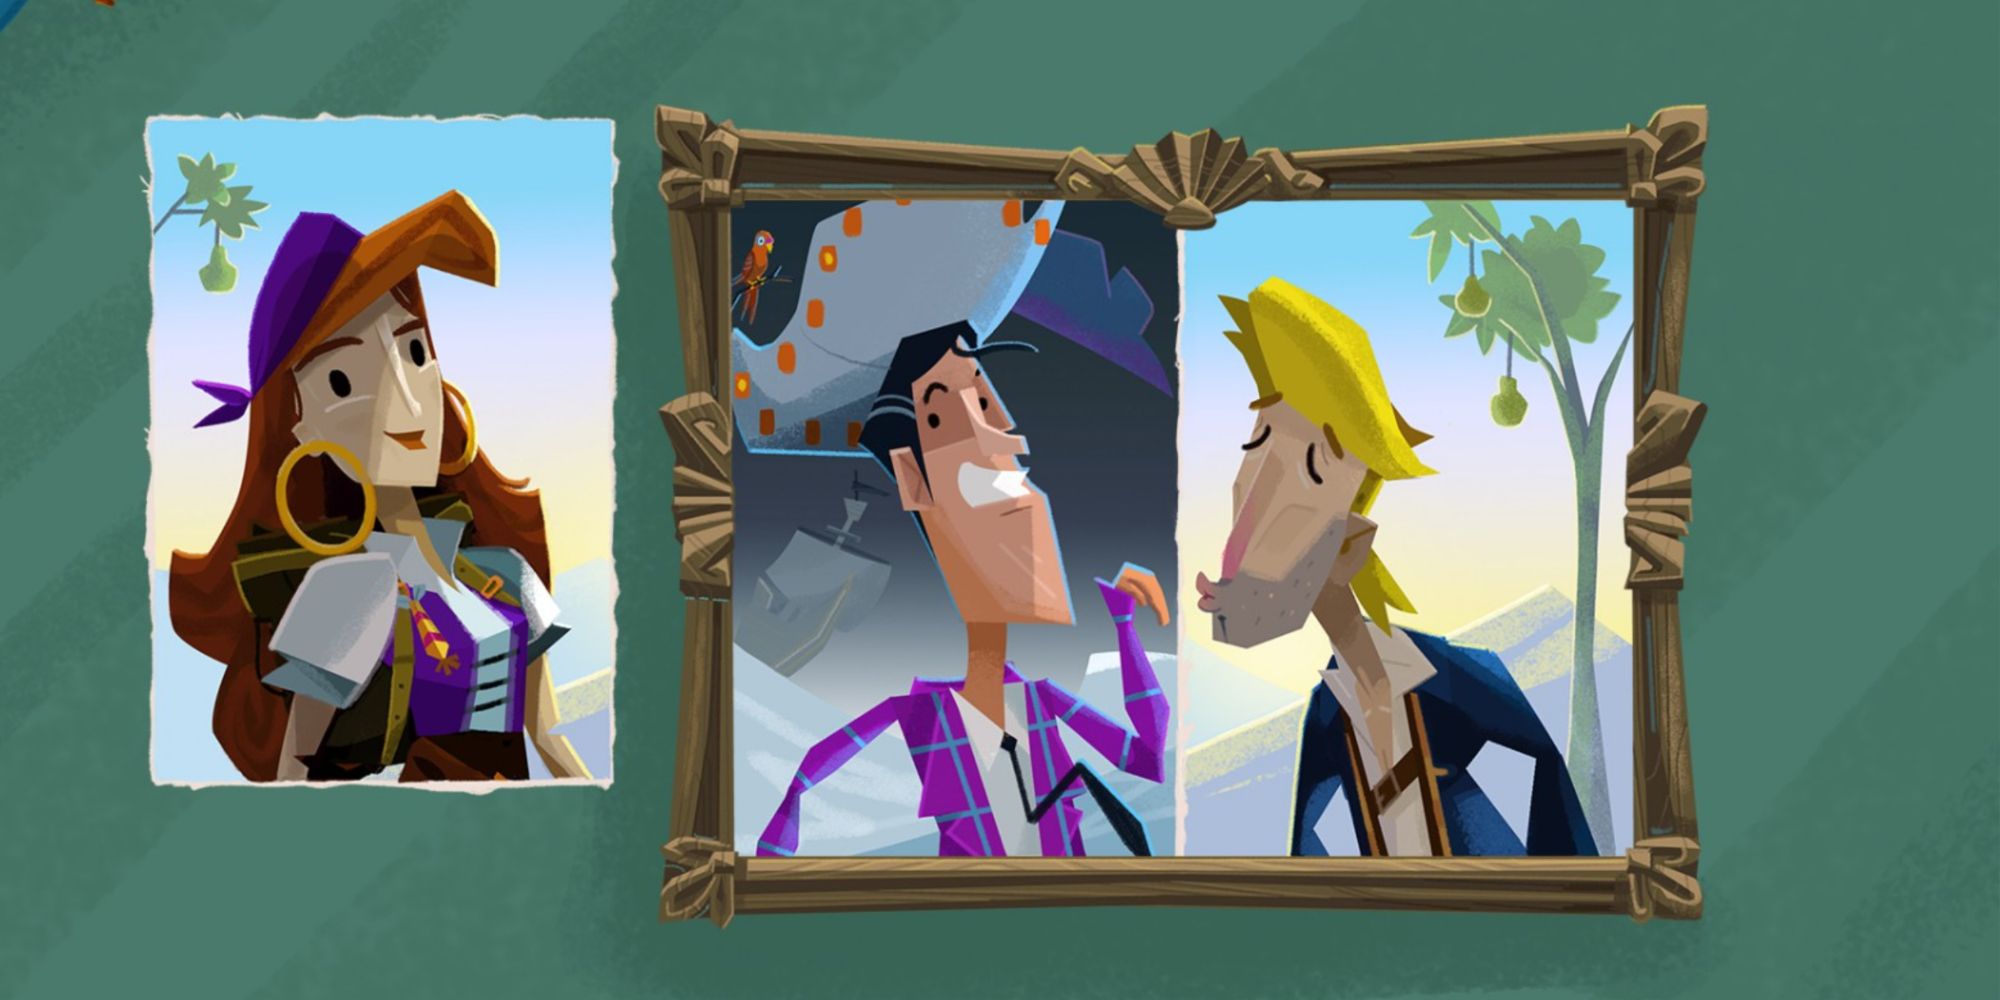 Return to Monkey Island Photo Frame with Stan and Guybrush's pictures